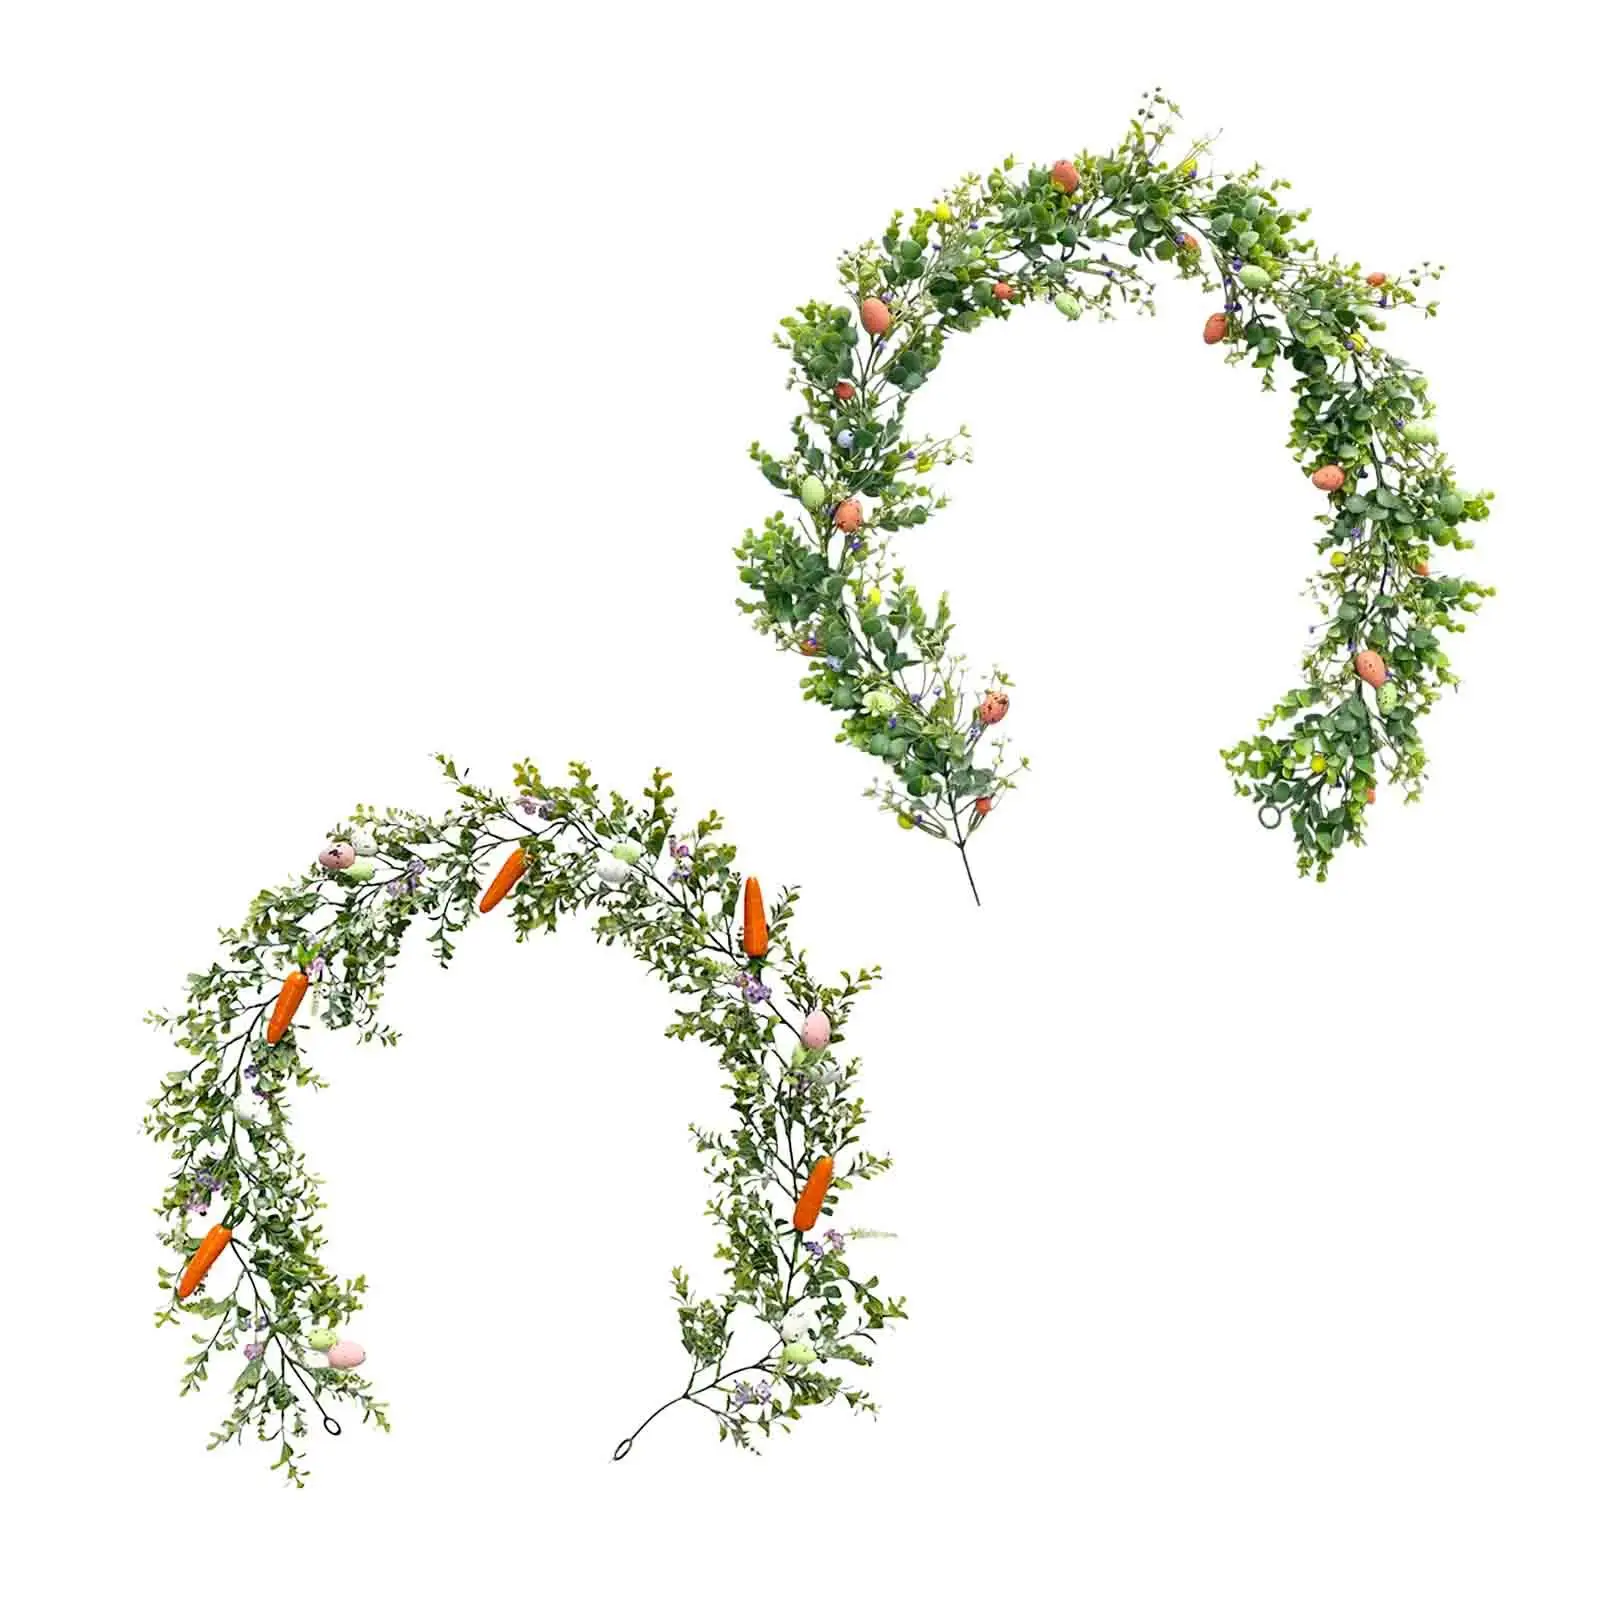 Easter Garland Ornament Hanging Green Leaves Greenery Garland Seasonal Decoration for Patio Holiday Mantel Garden Indoor Outdoor